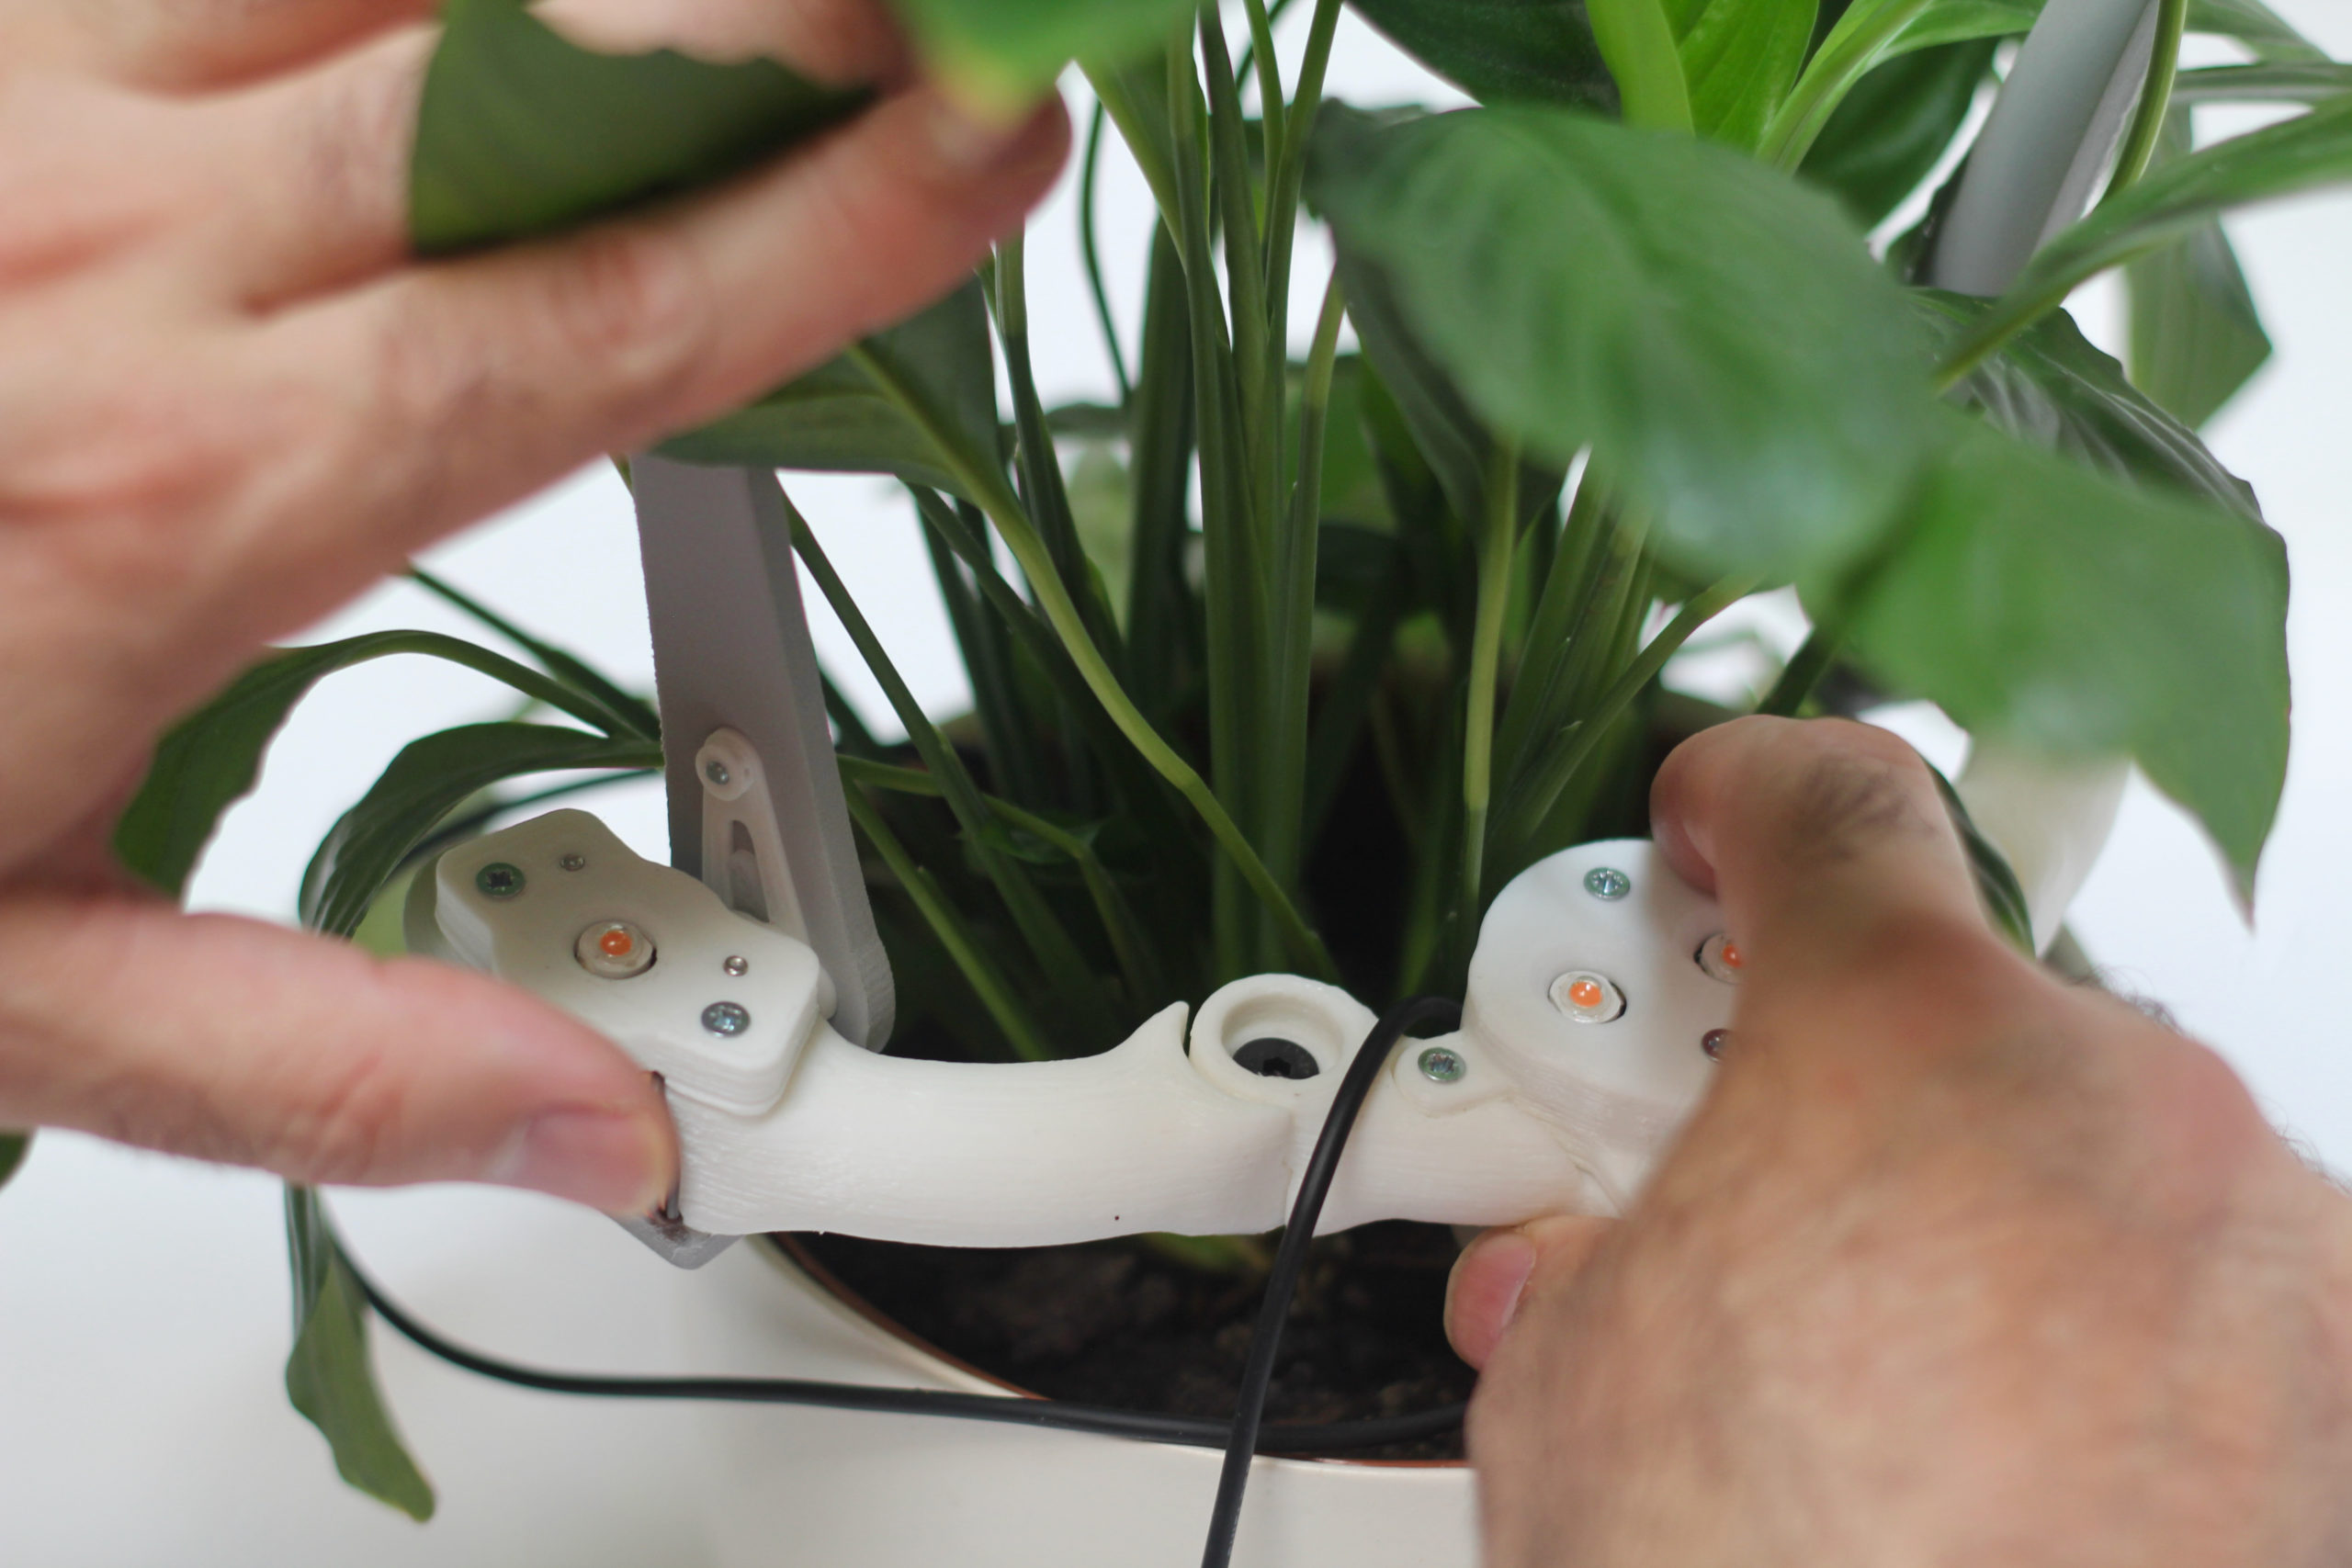 Inserting the sensor into a plant